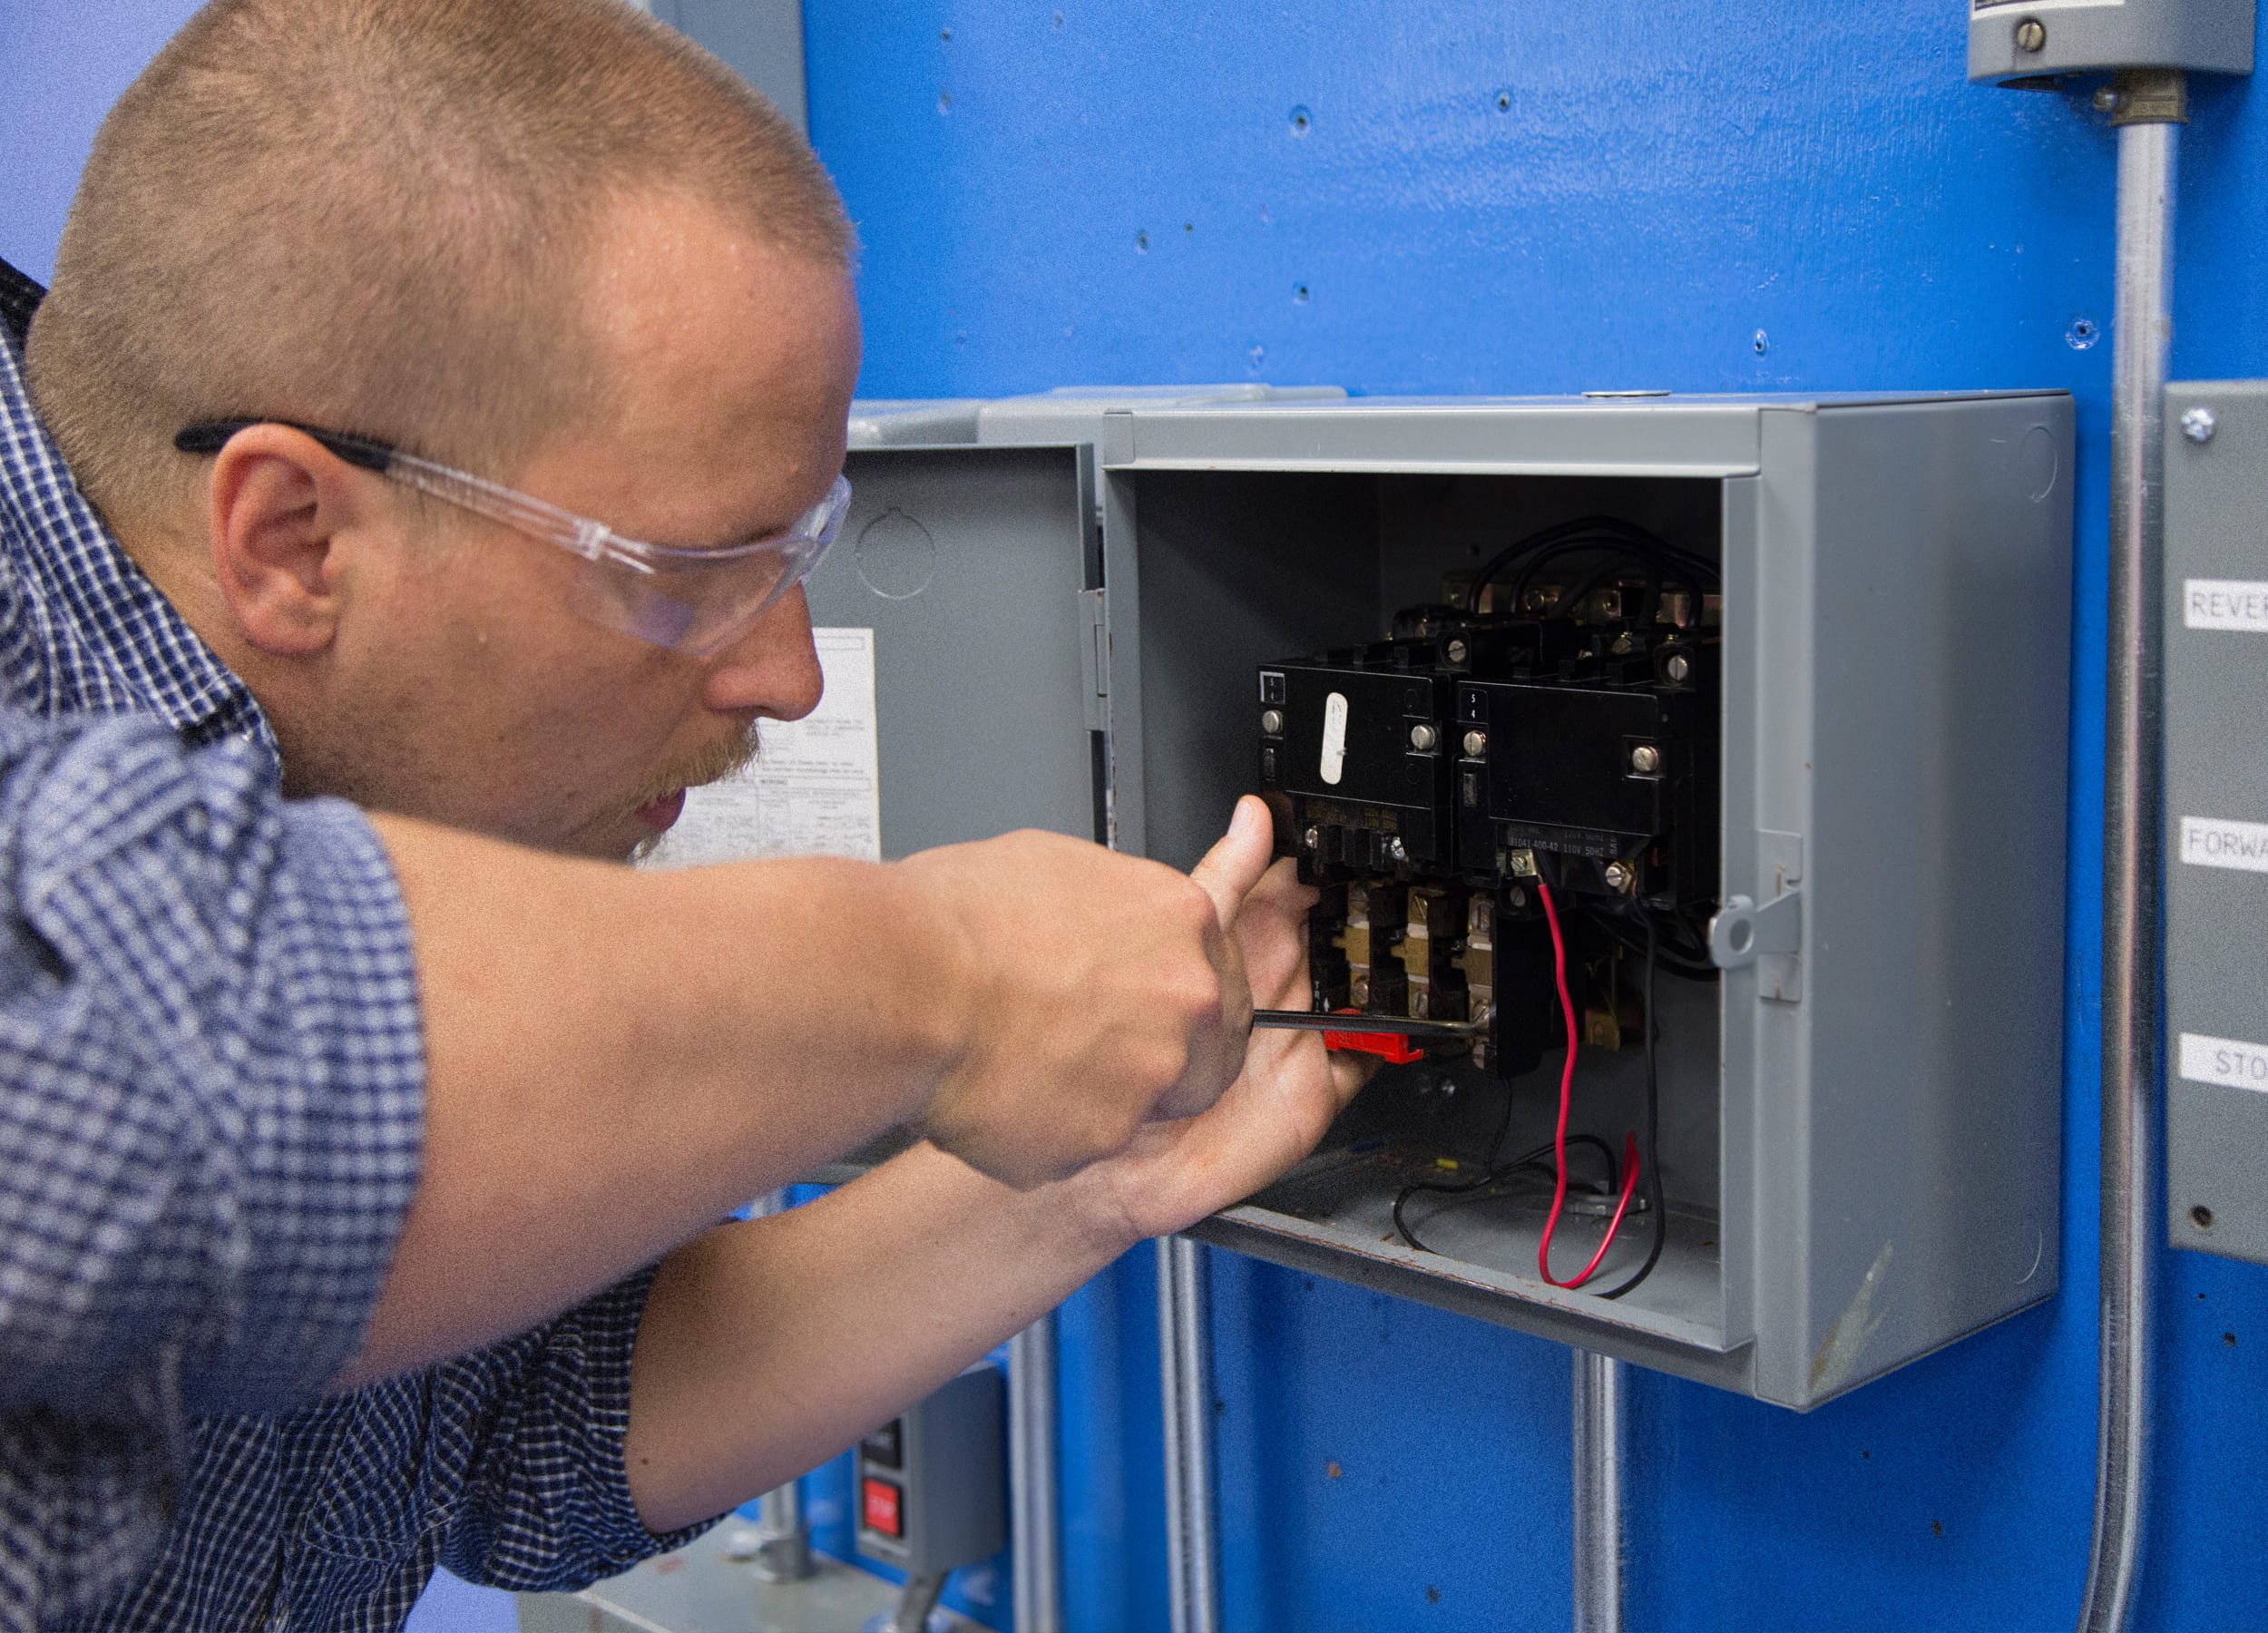 Electrical Engineering Technician student working on a panel